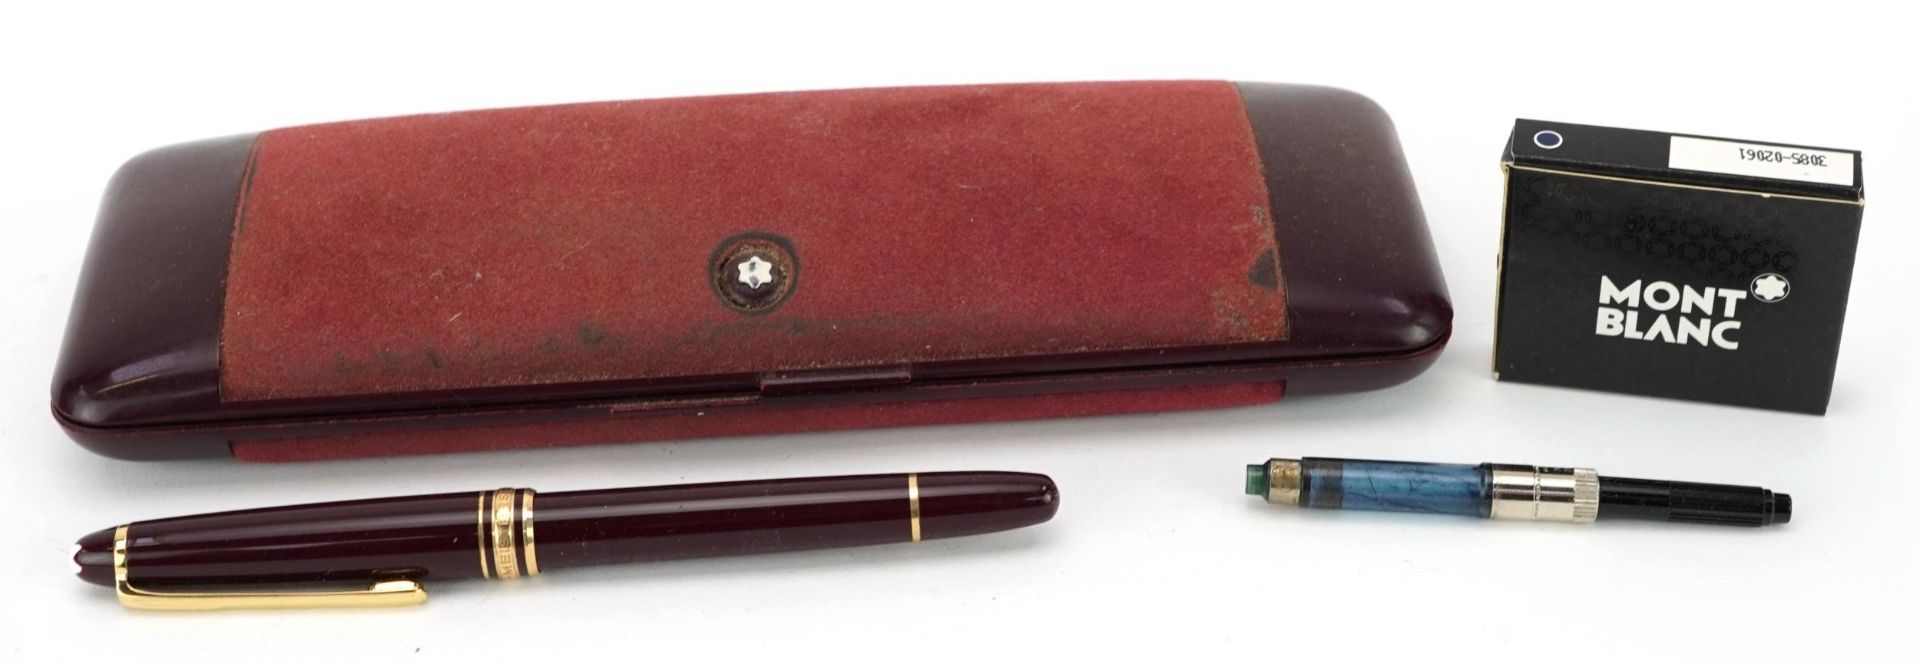 Montblanc Meisterstuck fountain pen with 14k gold nib and case : For further information on this lot